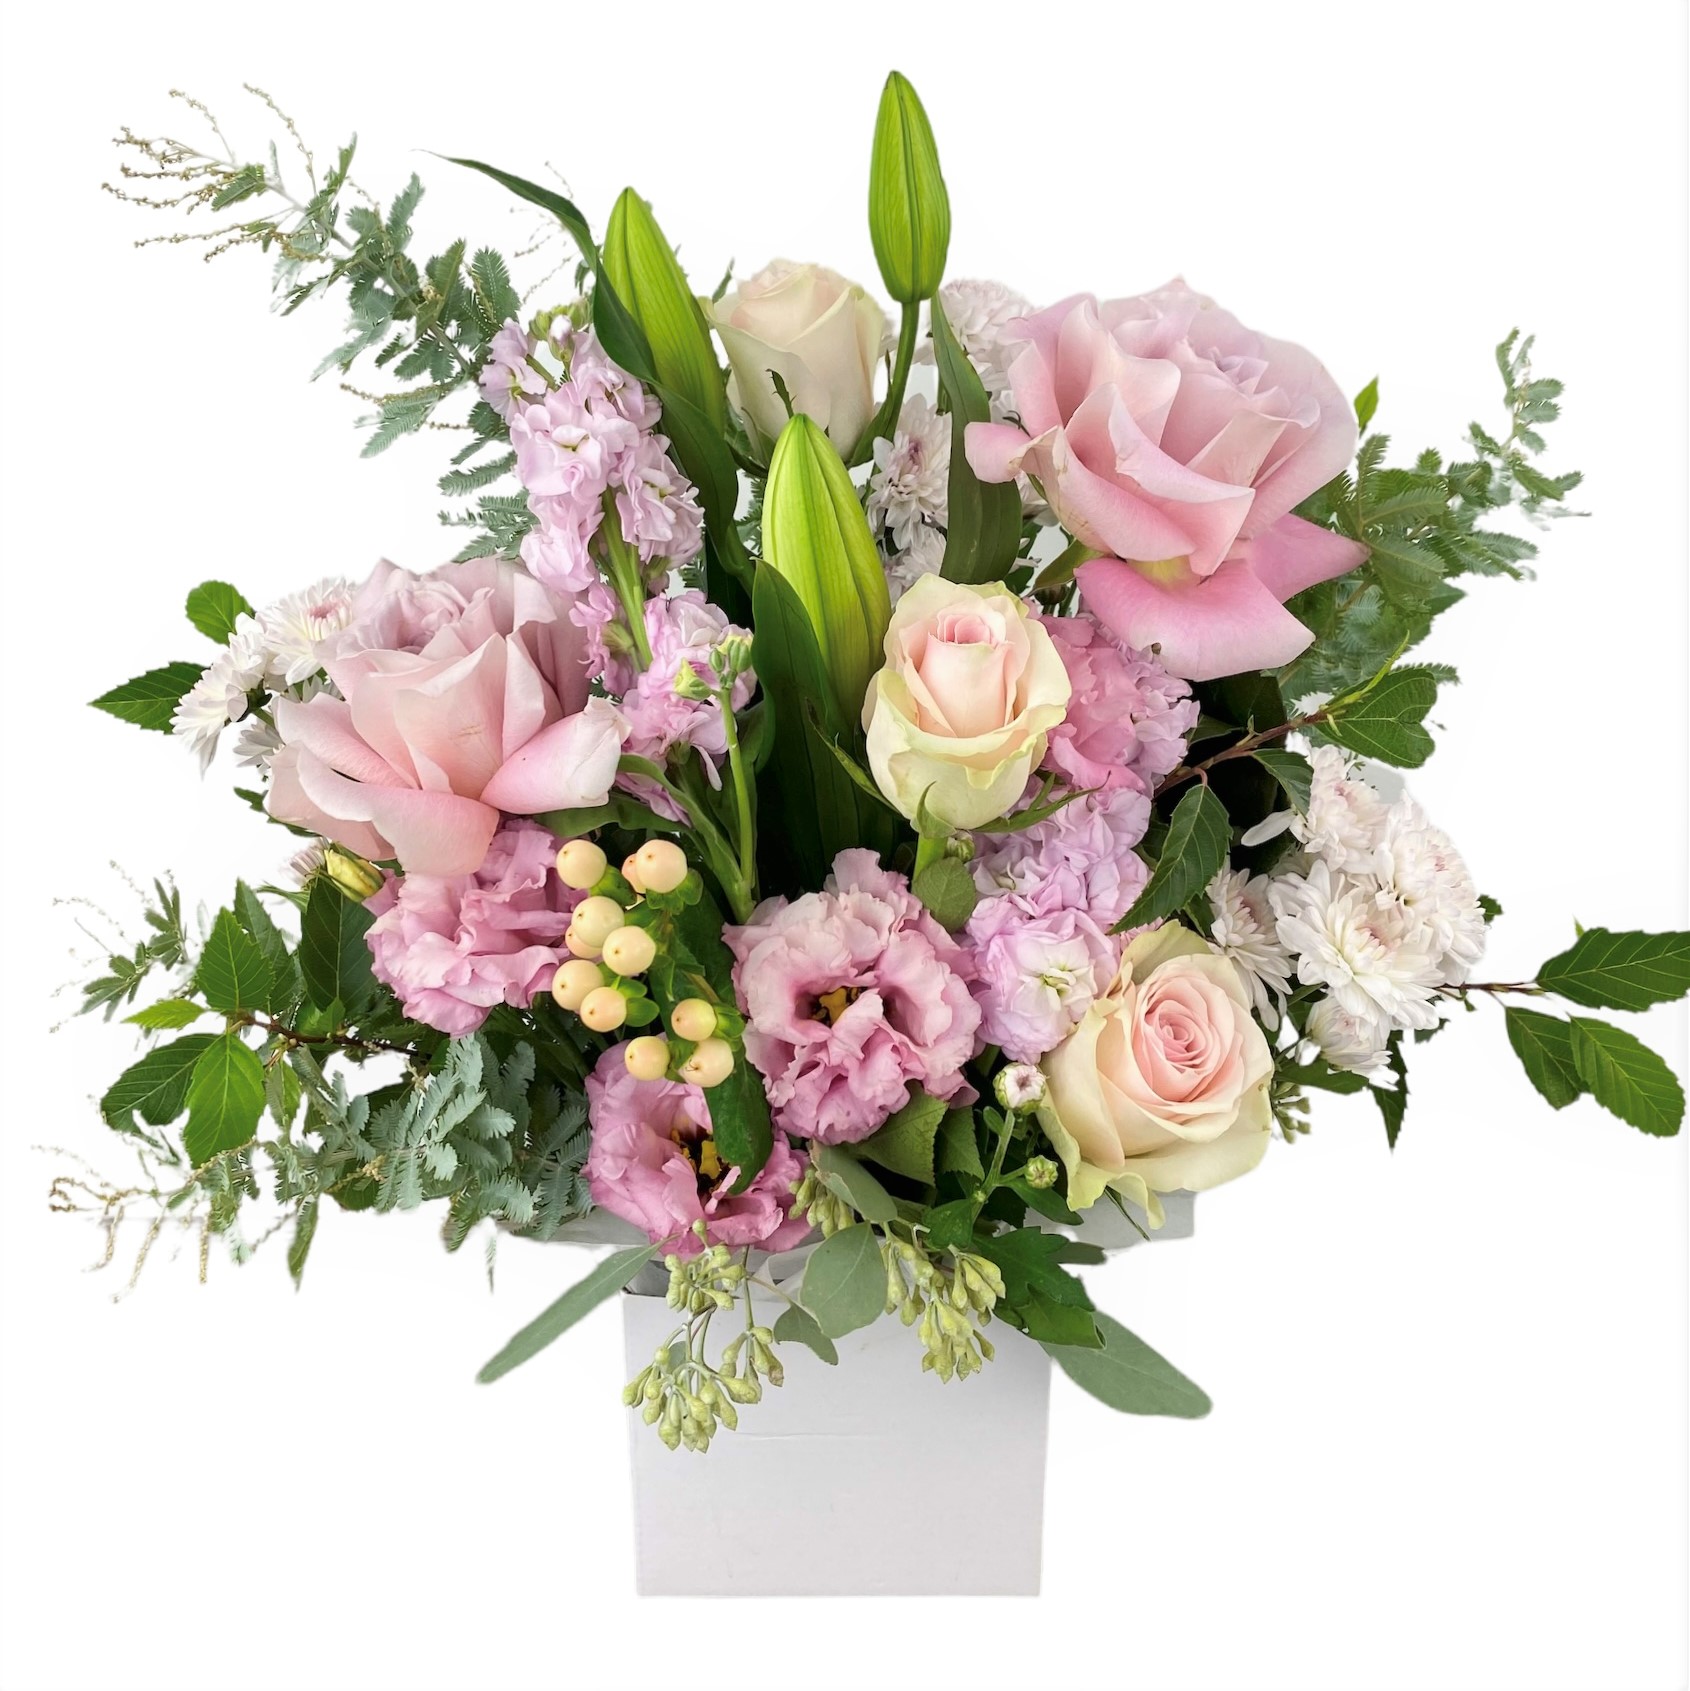 Flower arrangement featuring pale pink premium roses, oriental lily, chrysanthemums, lisianthus, stock & hypericum berry in white box.